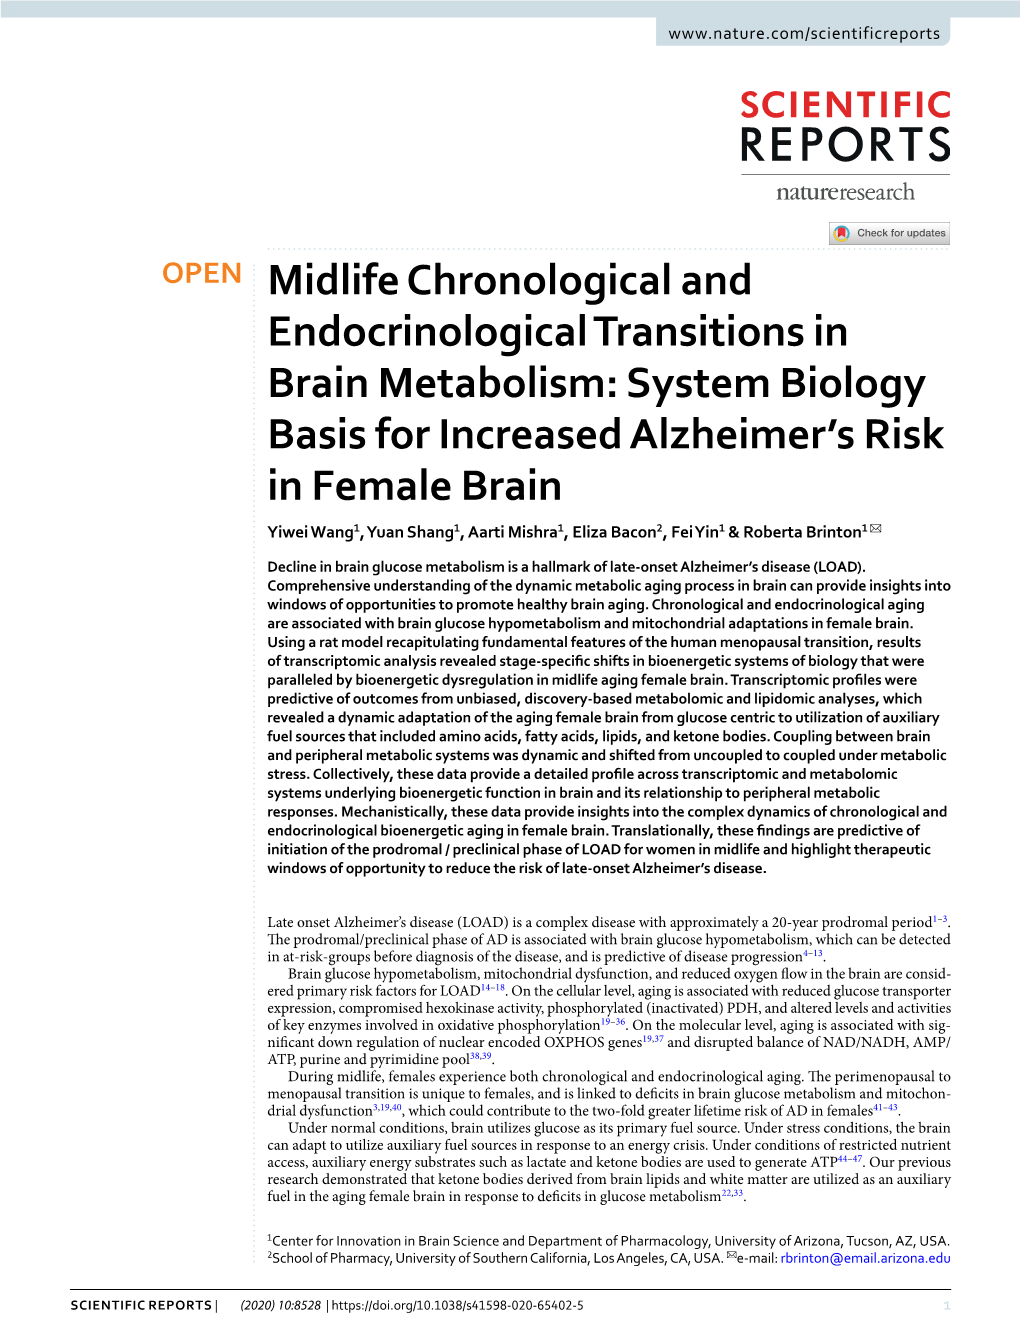 Midlife Chronological and Endocrinological Transitions In